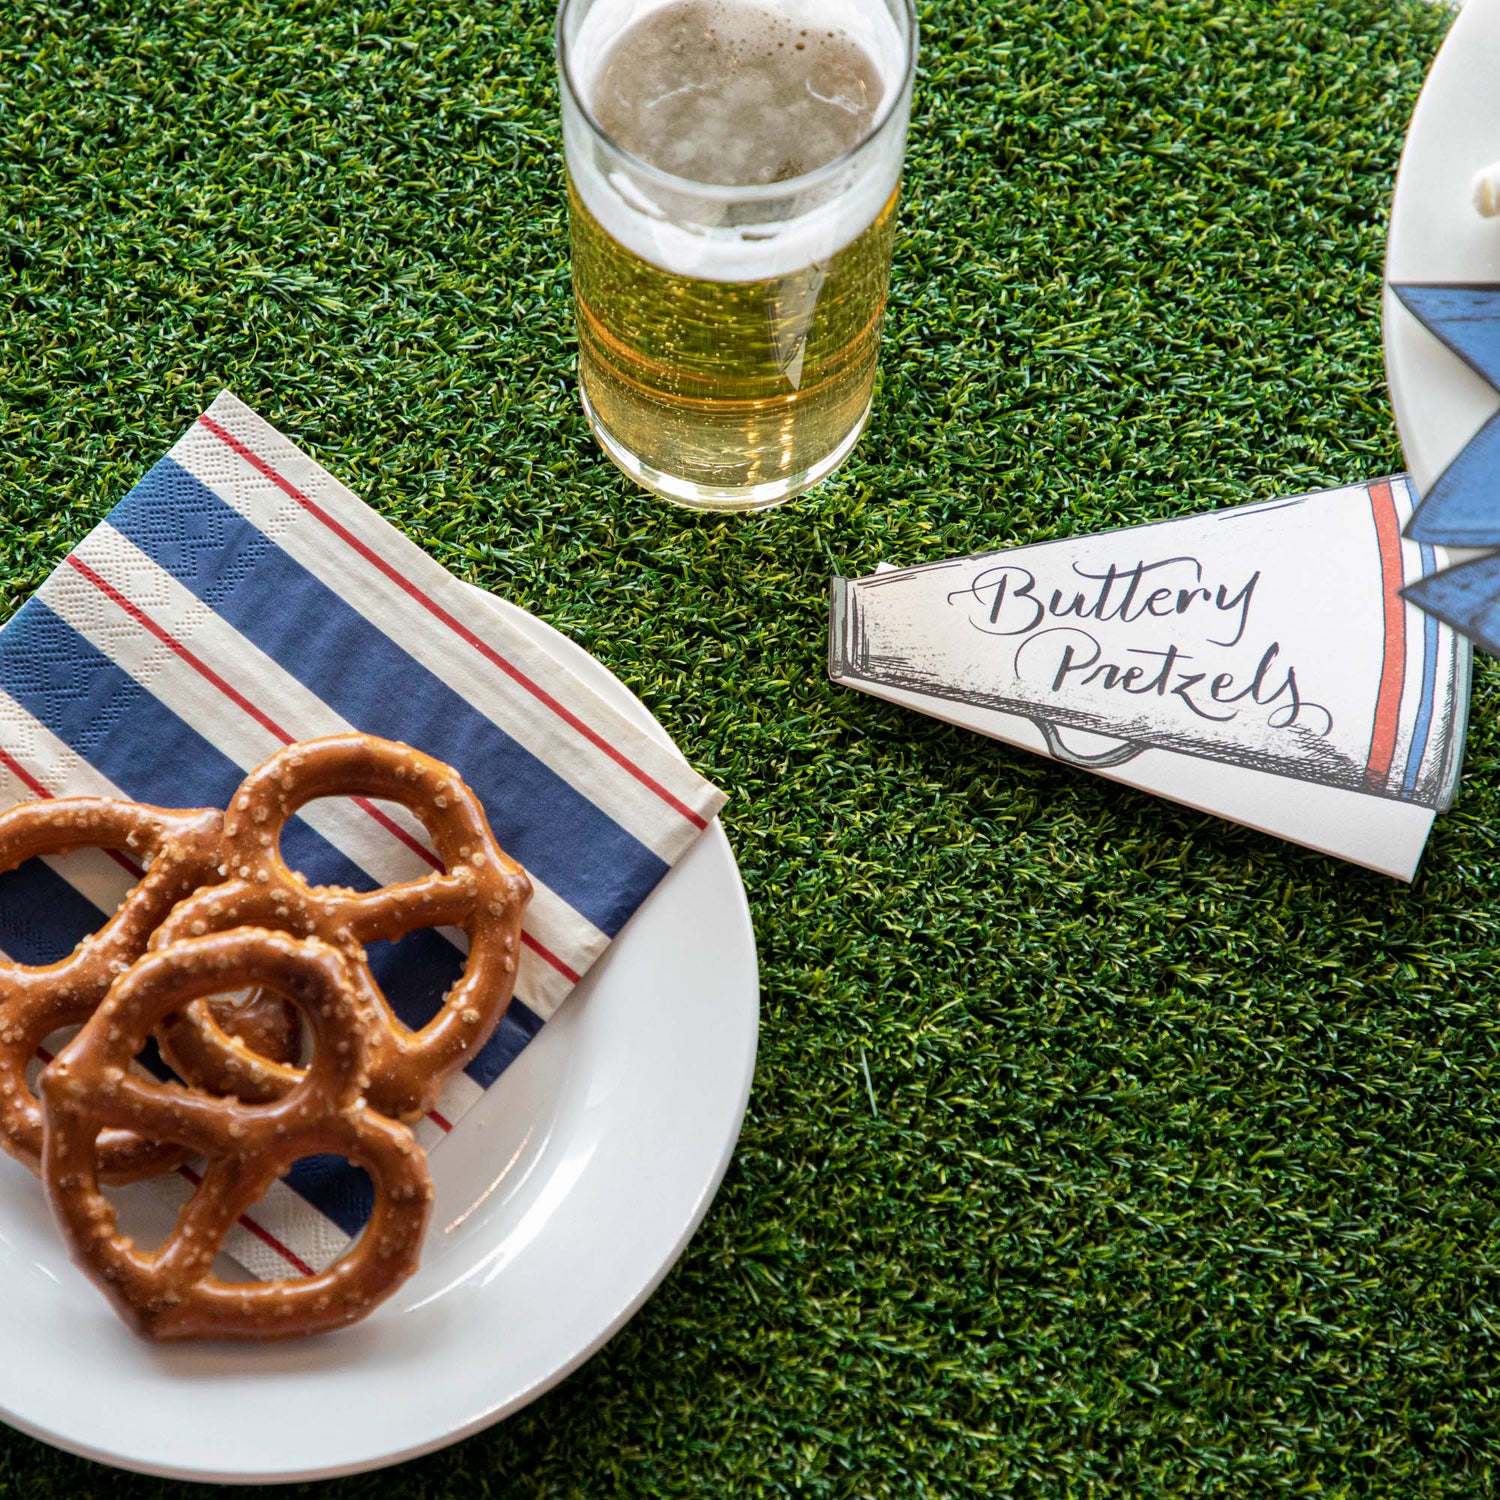 A Talking Tables Artificial Grass Table Runner with pretzels and beer on it.